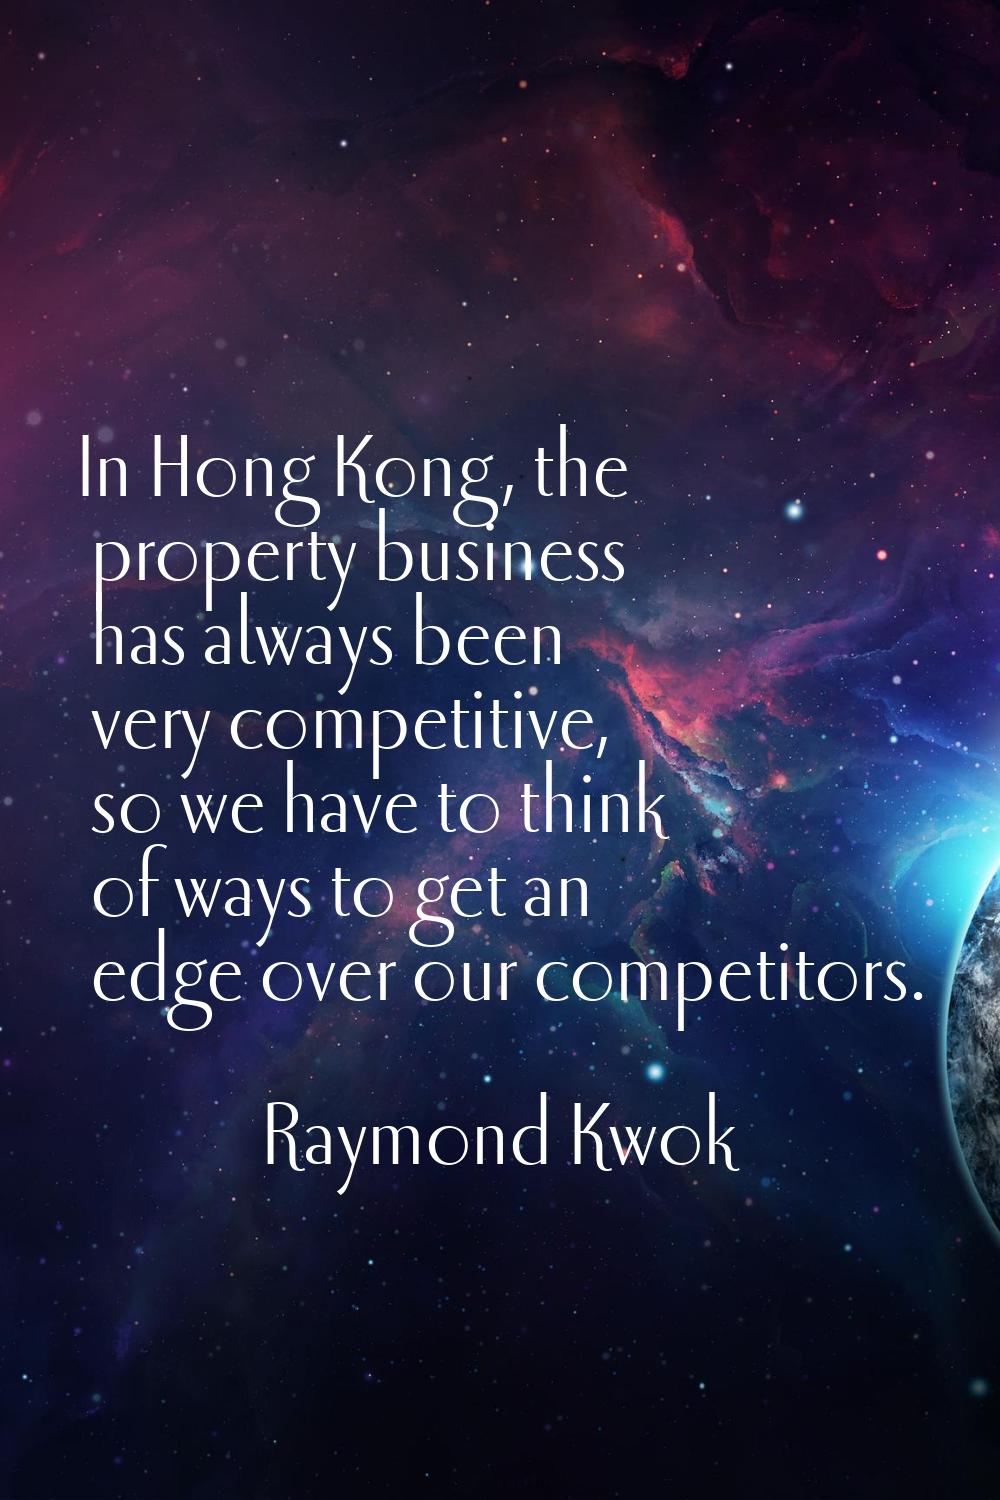 In Hong Kong, the property business has always been very competitive, so we have to think of ways t